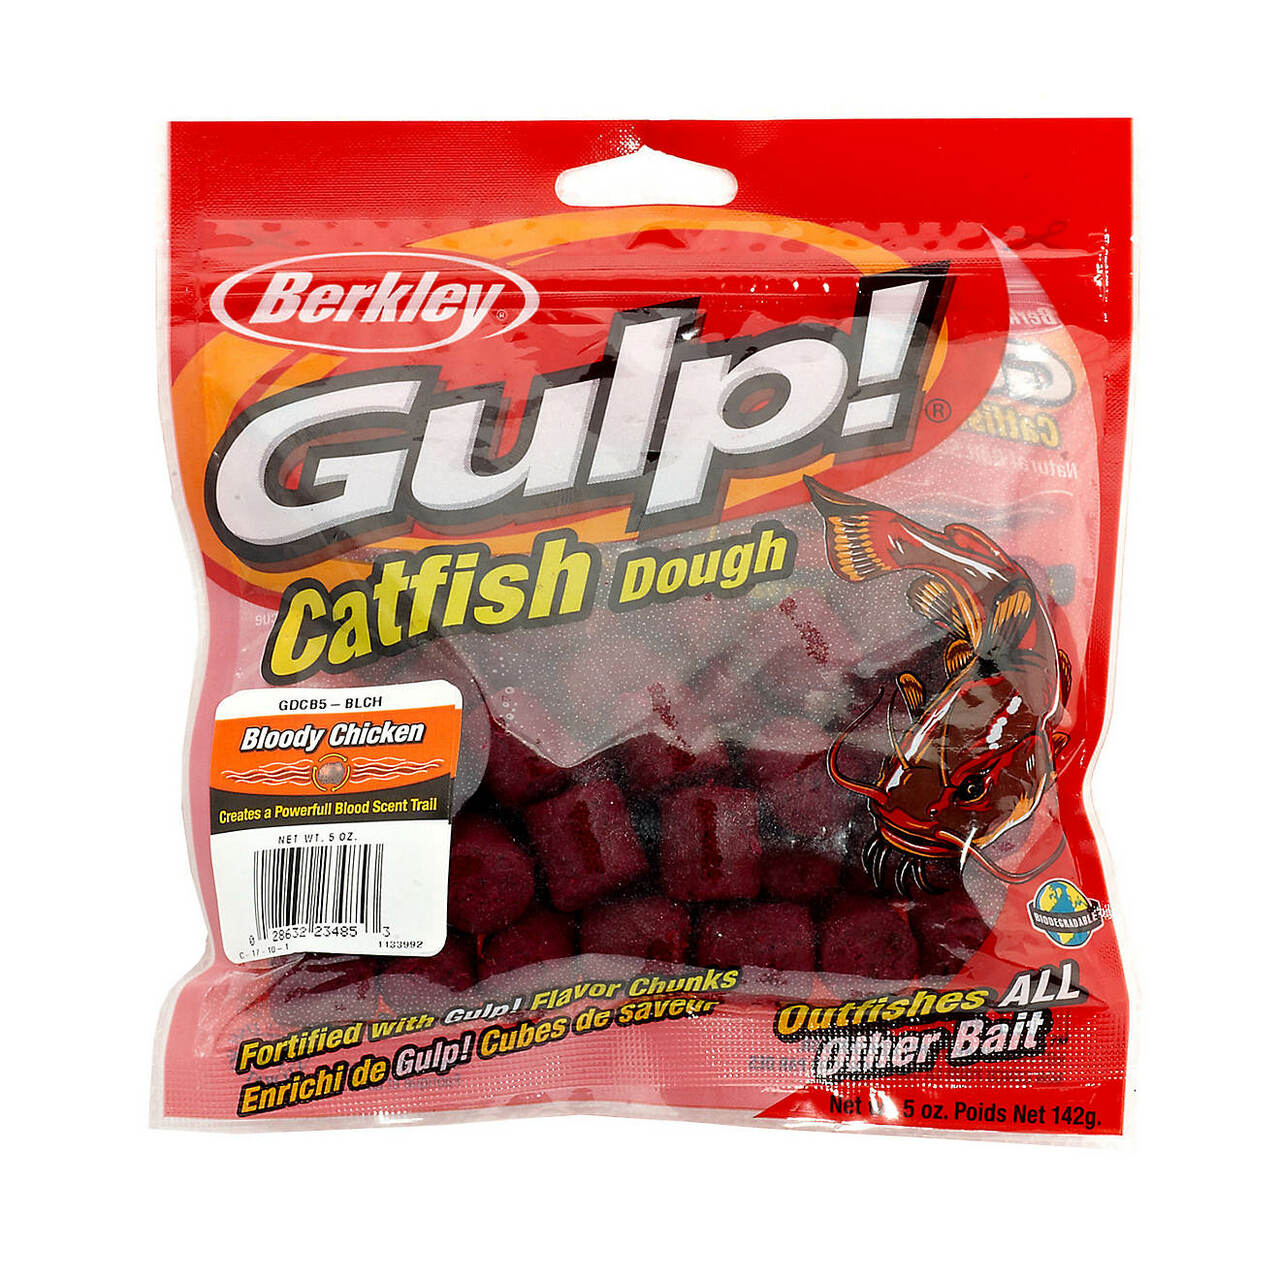 Berkley Gulp! Catfish Dough makes the power of Gulp! available in an easy to use form for catfish anglers everywhere. The extreme scent dispersion of Gulp! expands the strike zone allowing you to catch more fish! Berkley Gulp! truly is the next generation in soft bait!